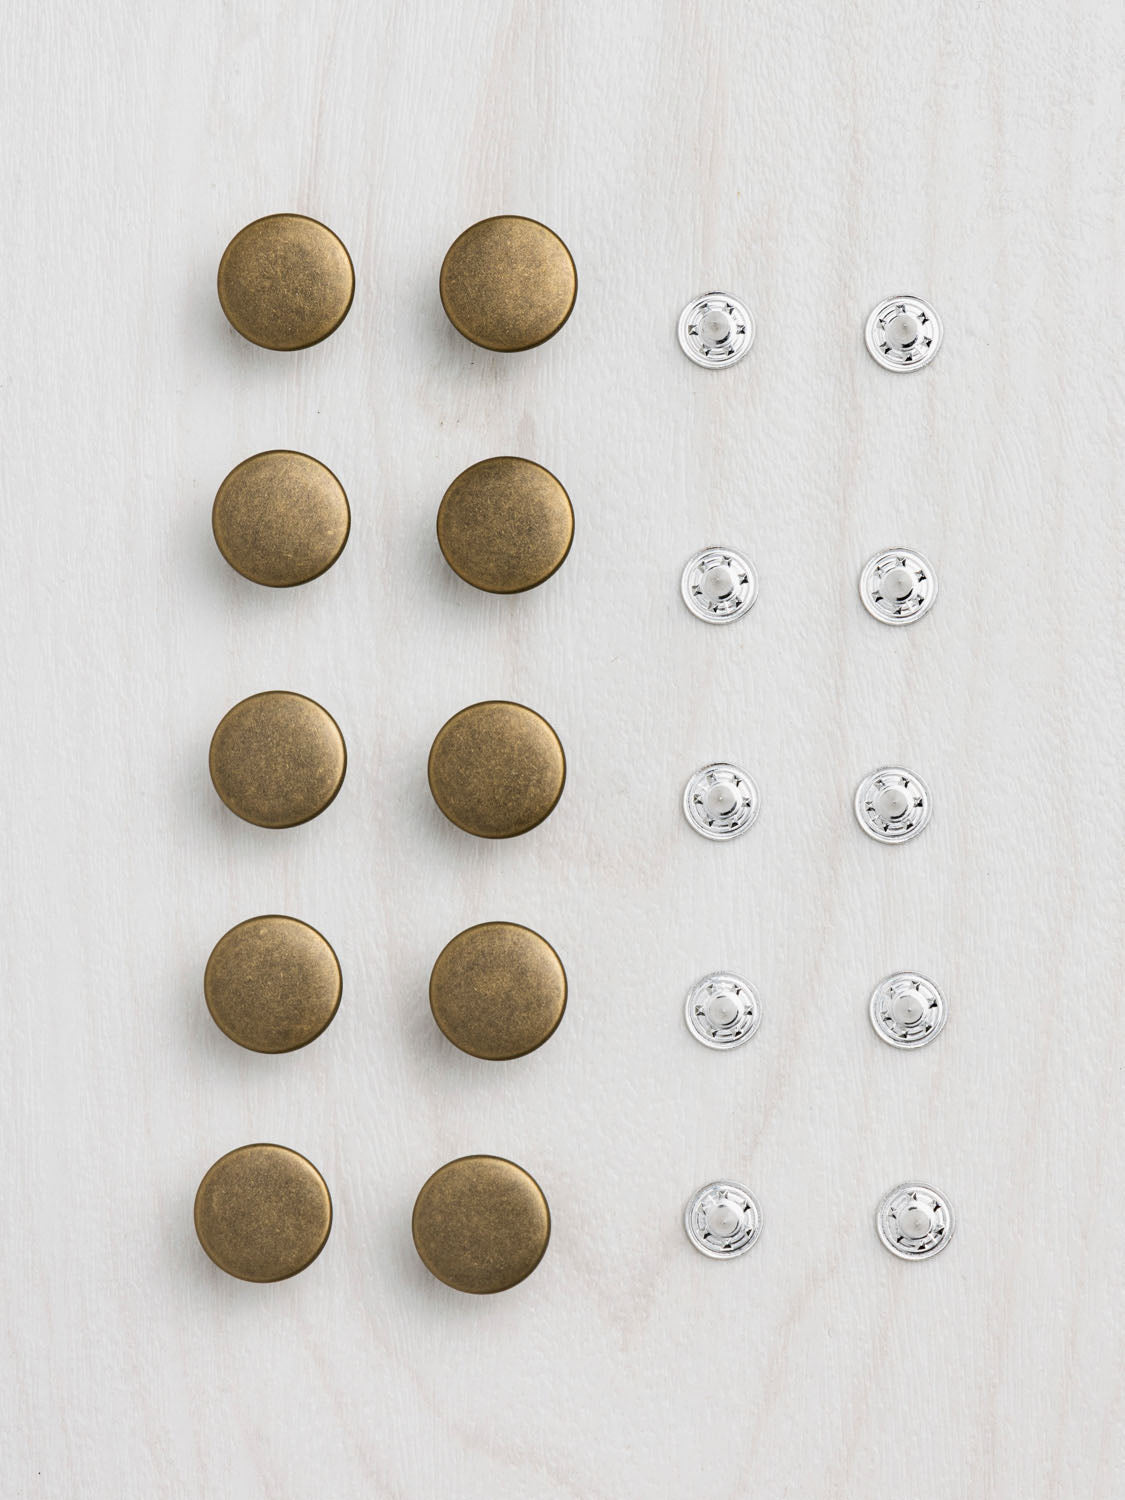 Jeans Buttons (17mm) - Set of 2  Jeans button, Solid metal, Stud earrings